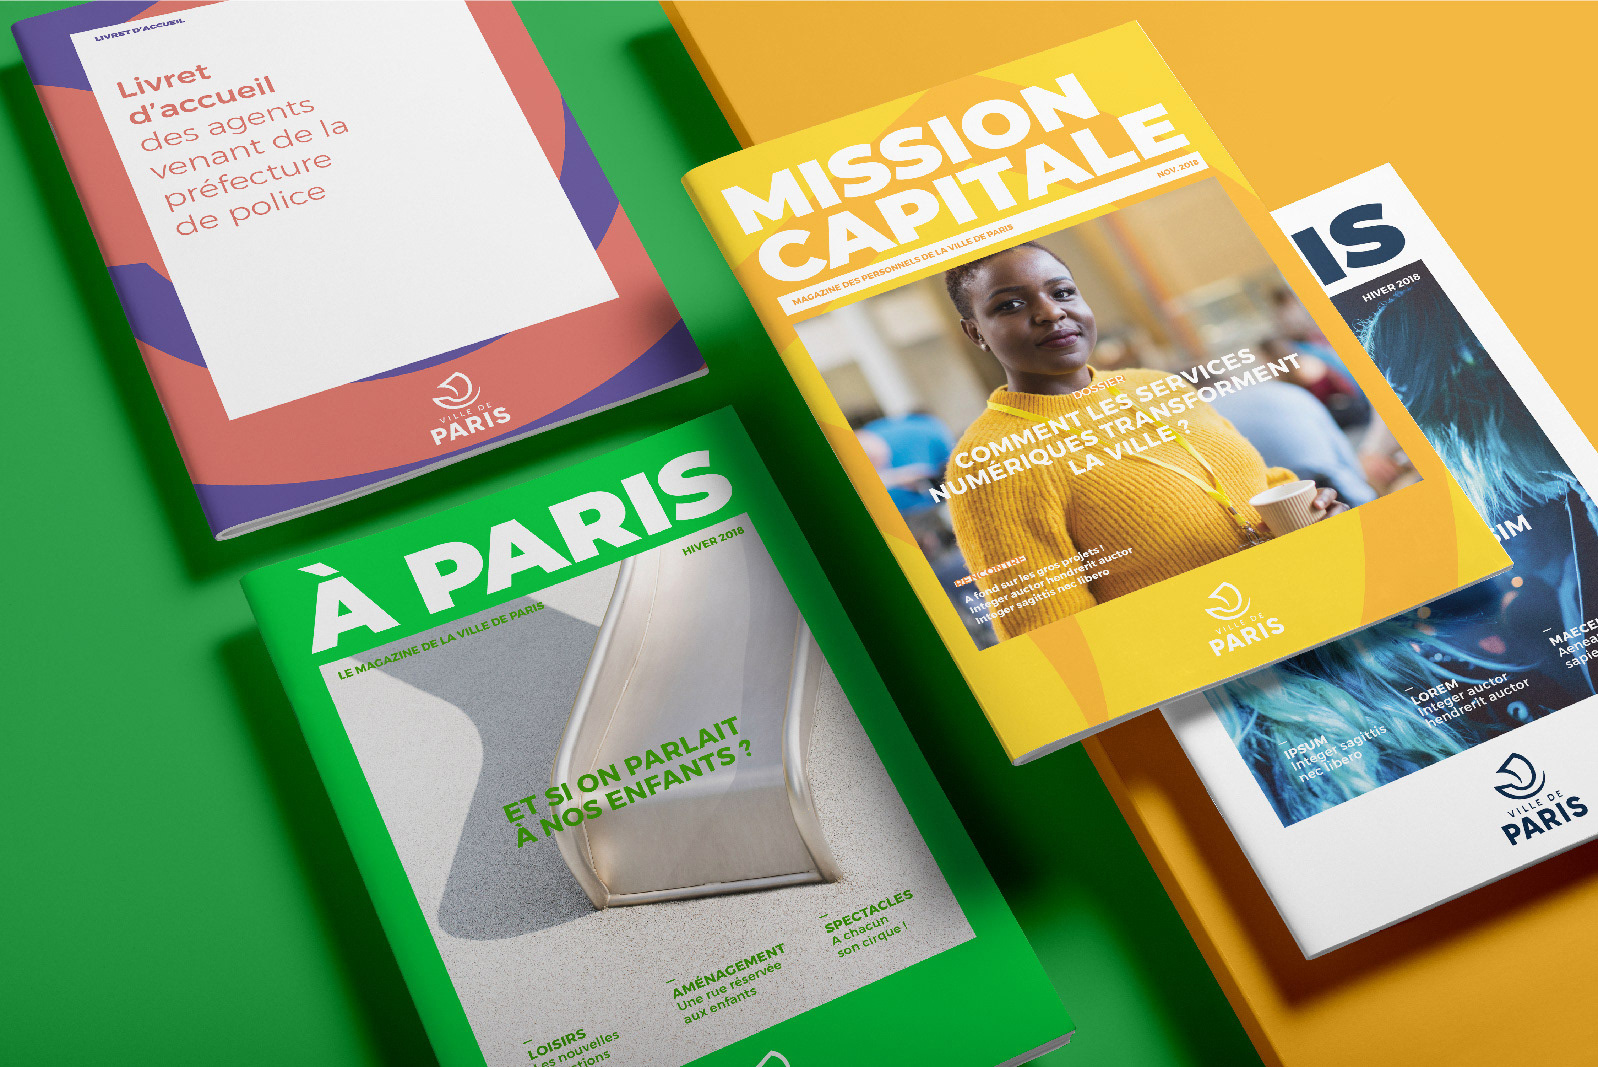 New Logo and Identity for City of Paris by Carré Noir